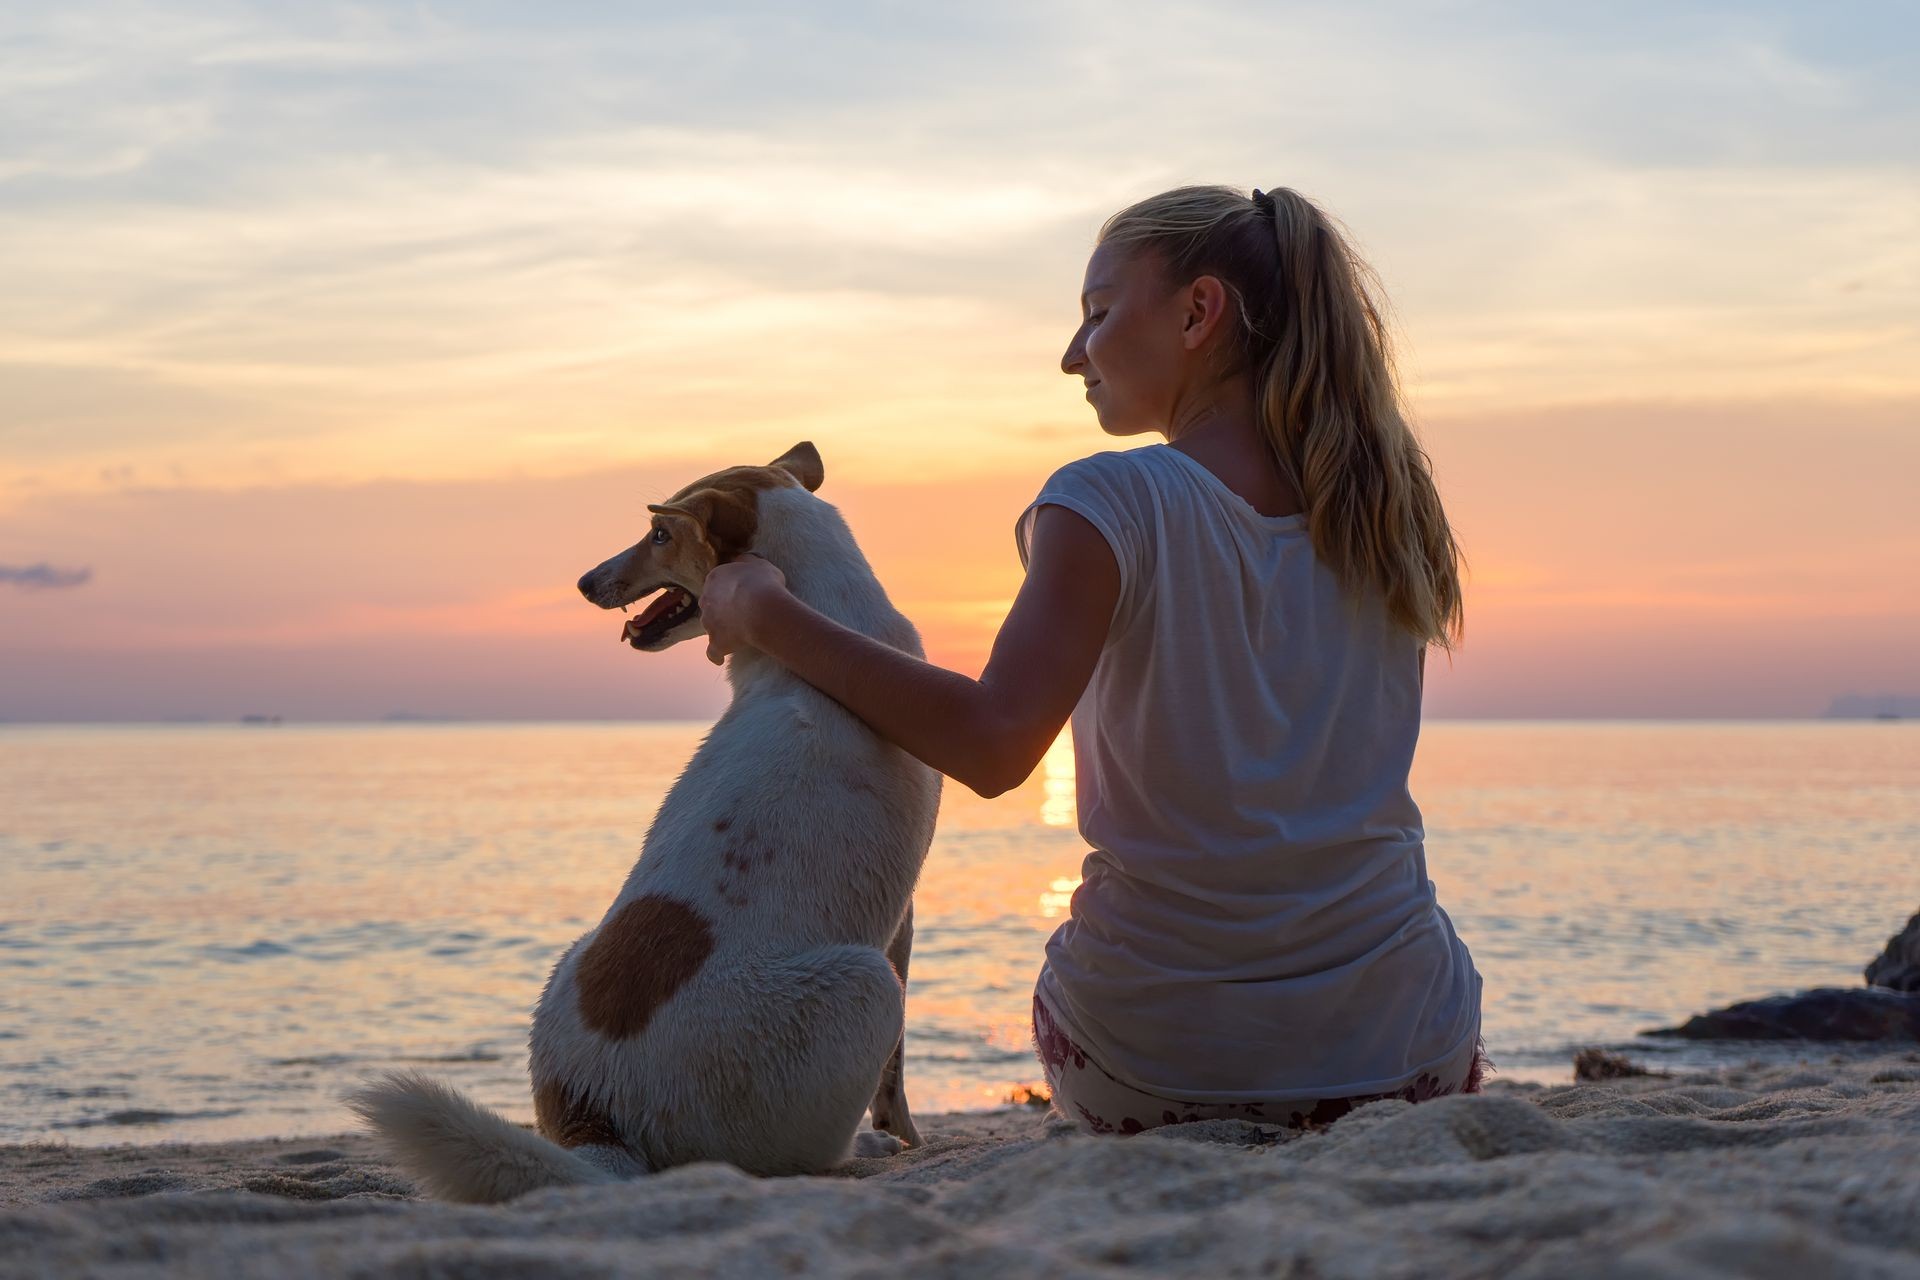 The young girl sits on sand with a dog, on the beach, the island Samui, Thailand, take a selfie with a dog